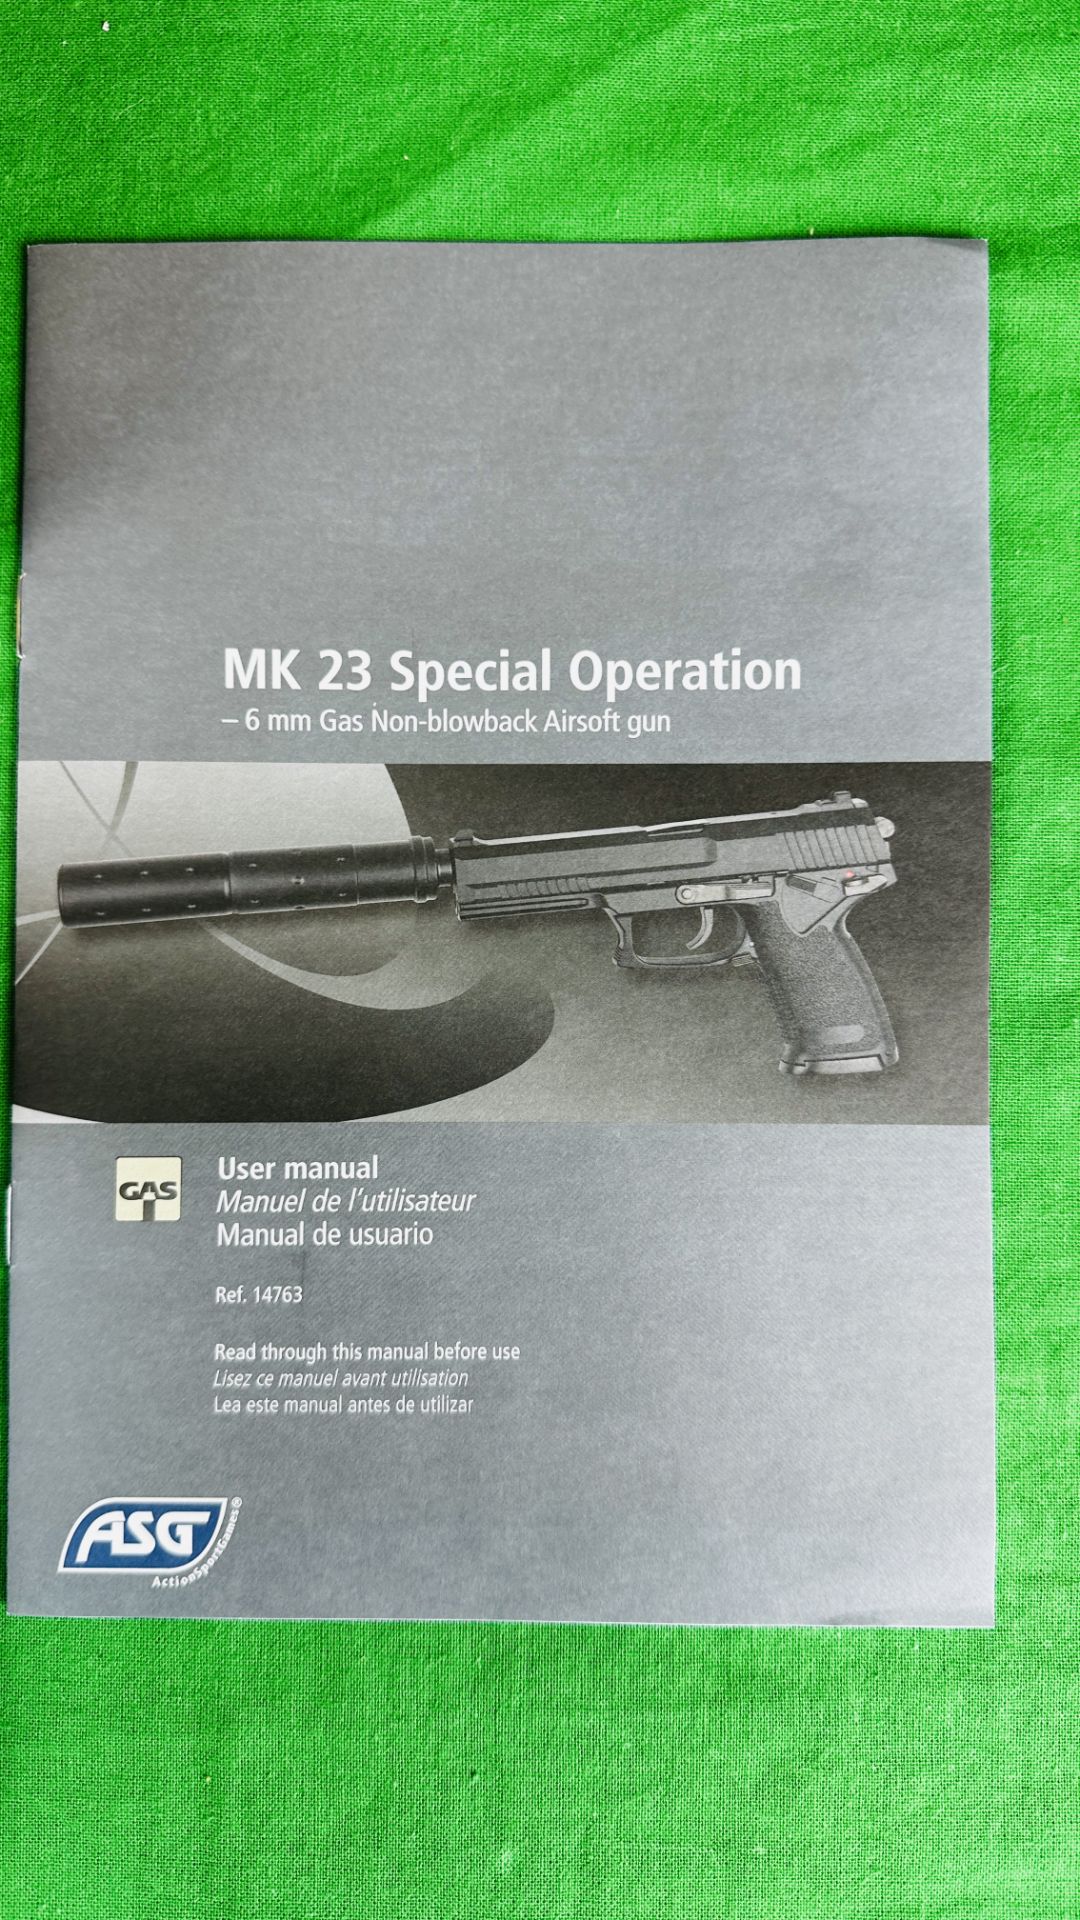 ASG MK23 SPECIAL OPERATION 6MM BB GAS NON-BLOWBACK AIR PISTOL BOXED WITH ACCESSORIES - (ALL GUNS TO - Image 9 of 10